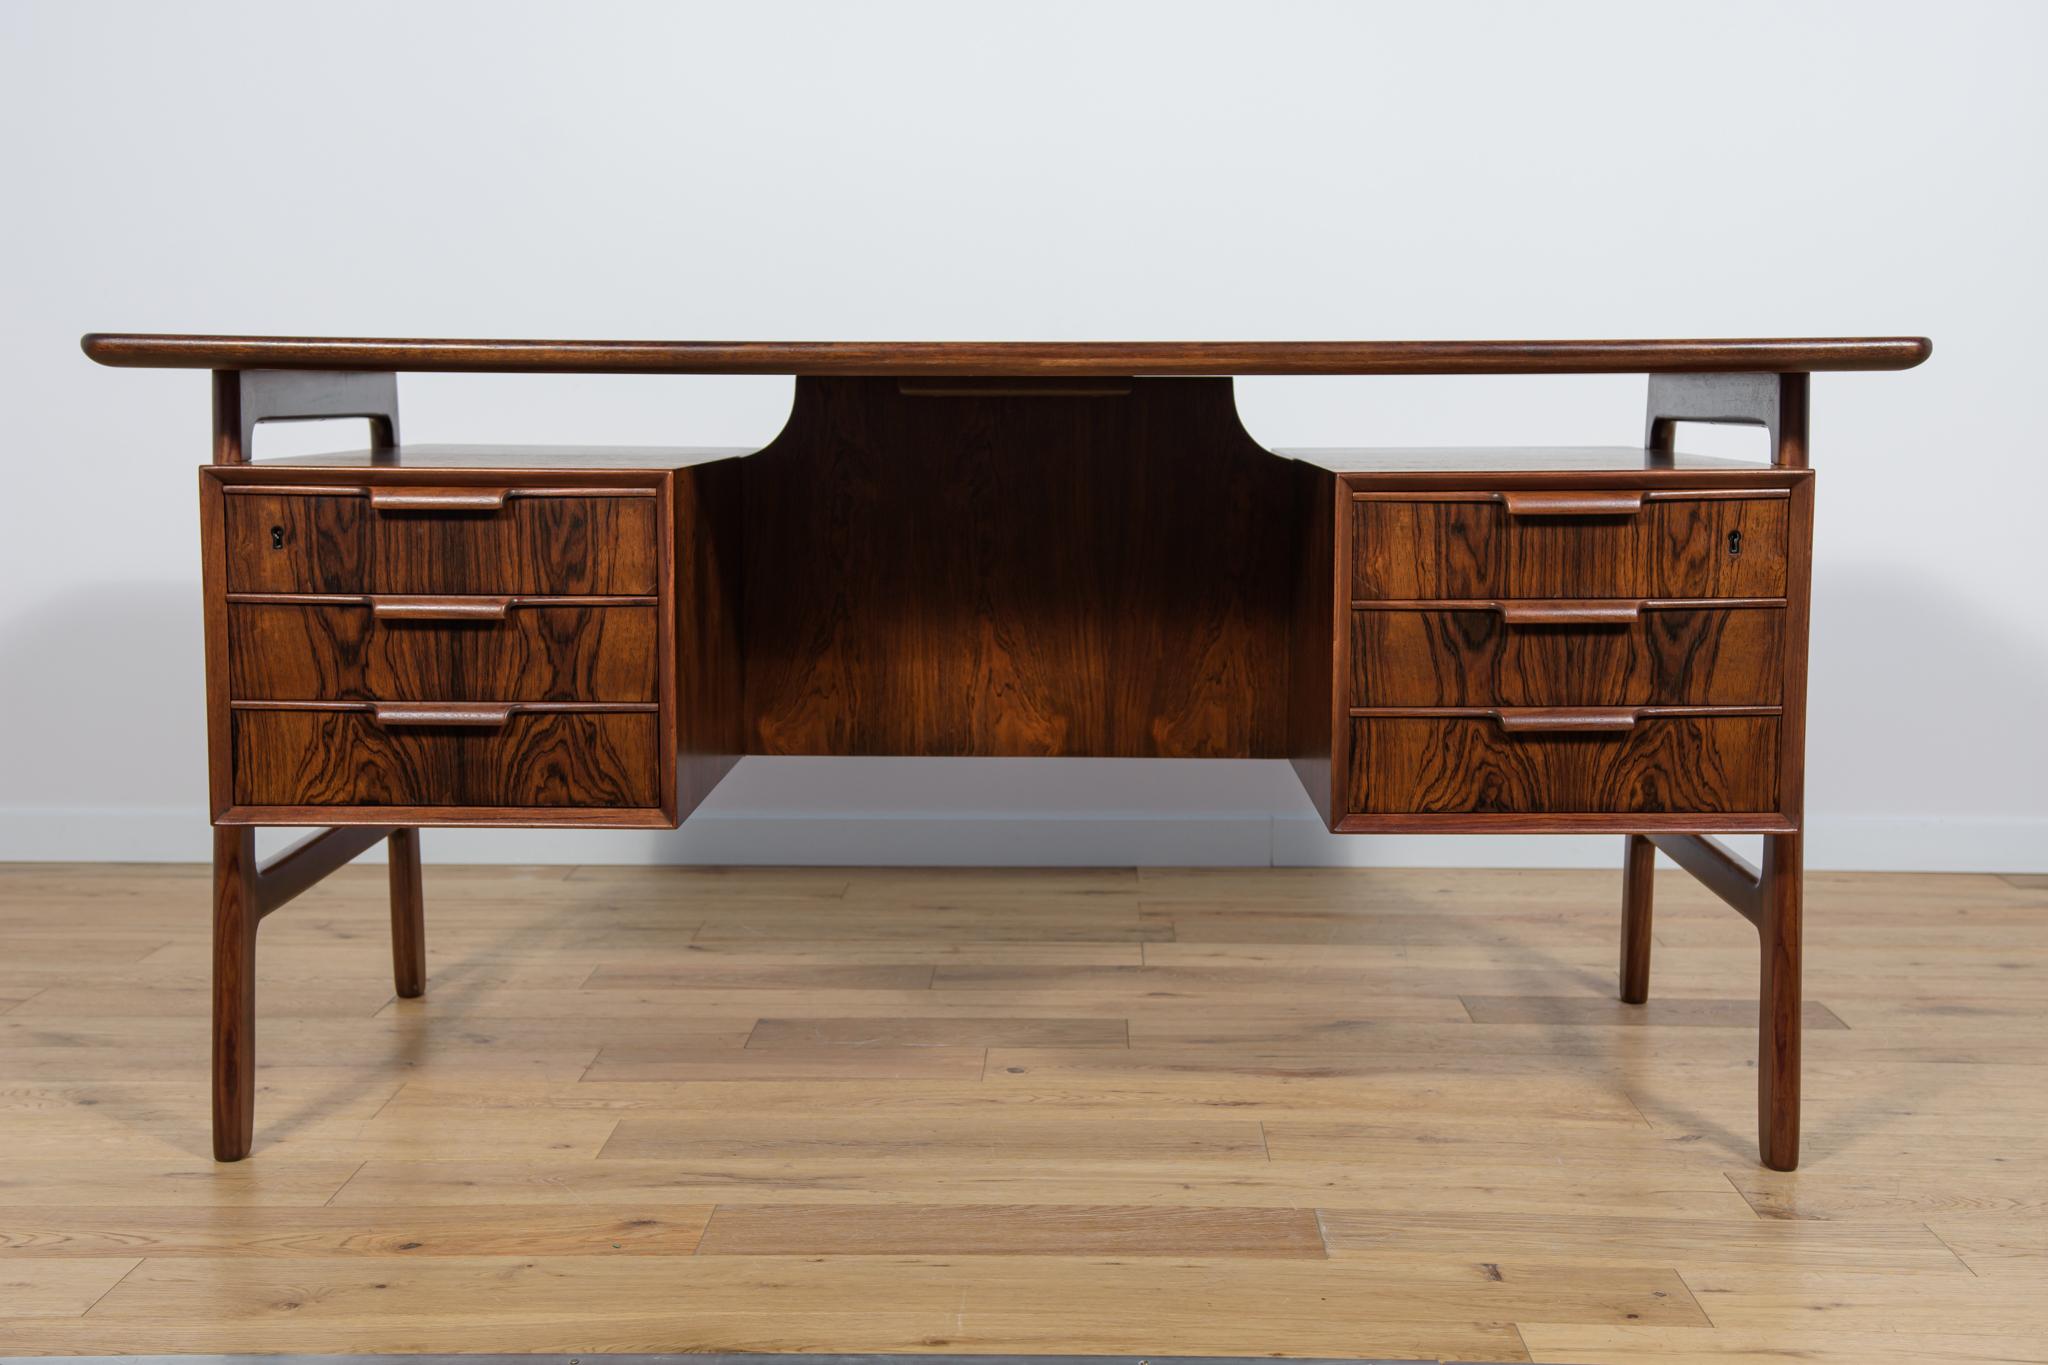 Mid-Century desk, model 75, produced by Omann Jun danish furniture factory. A desk with a high craftsmanship of design and workmanship, characteristic of Danish design from the 1960s. In front two modules with 3 drawers each , back with open space